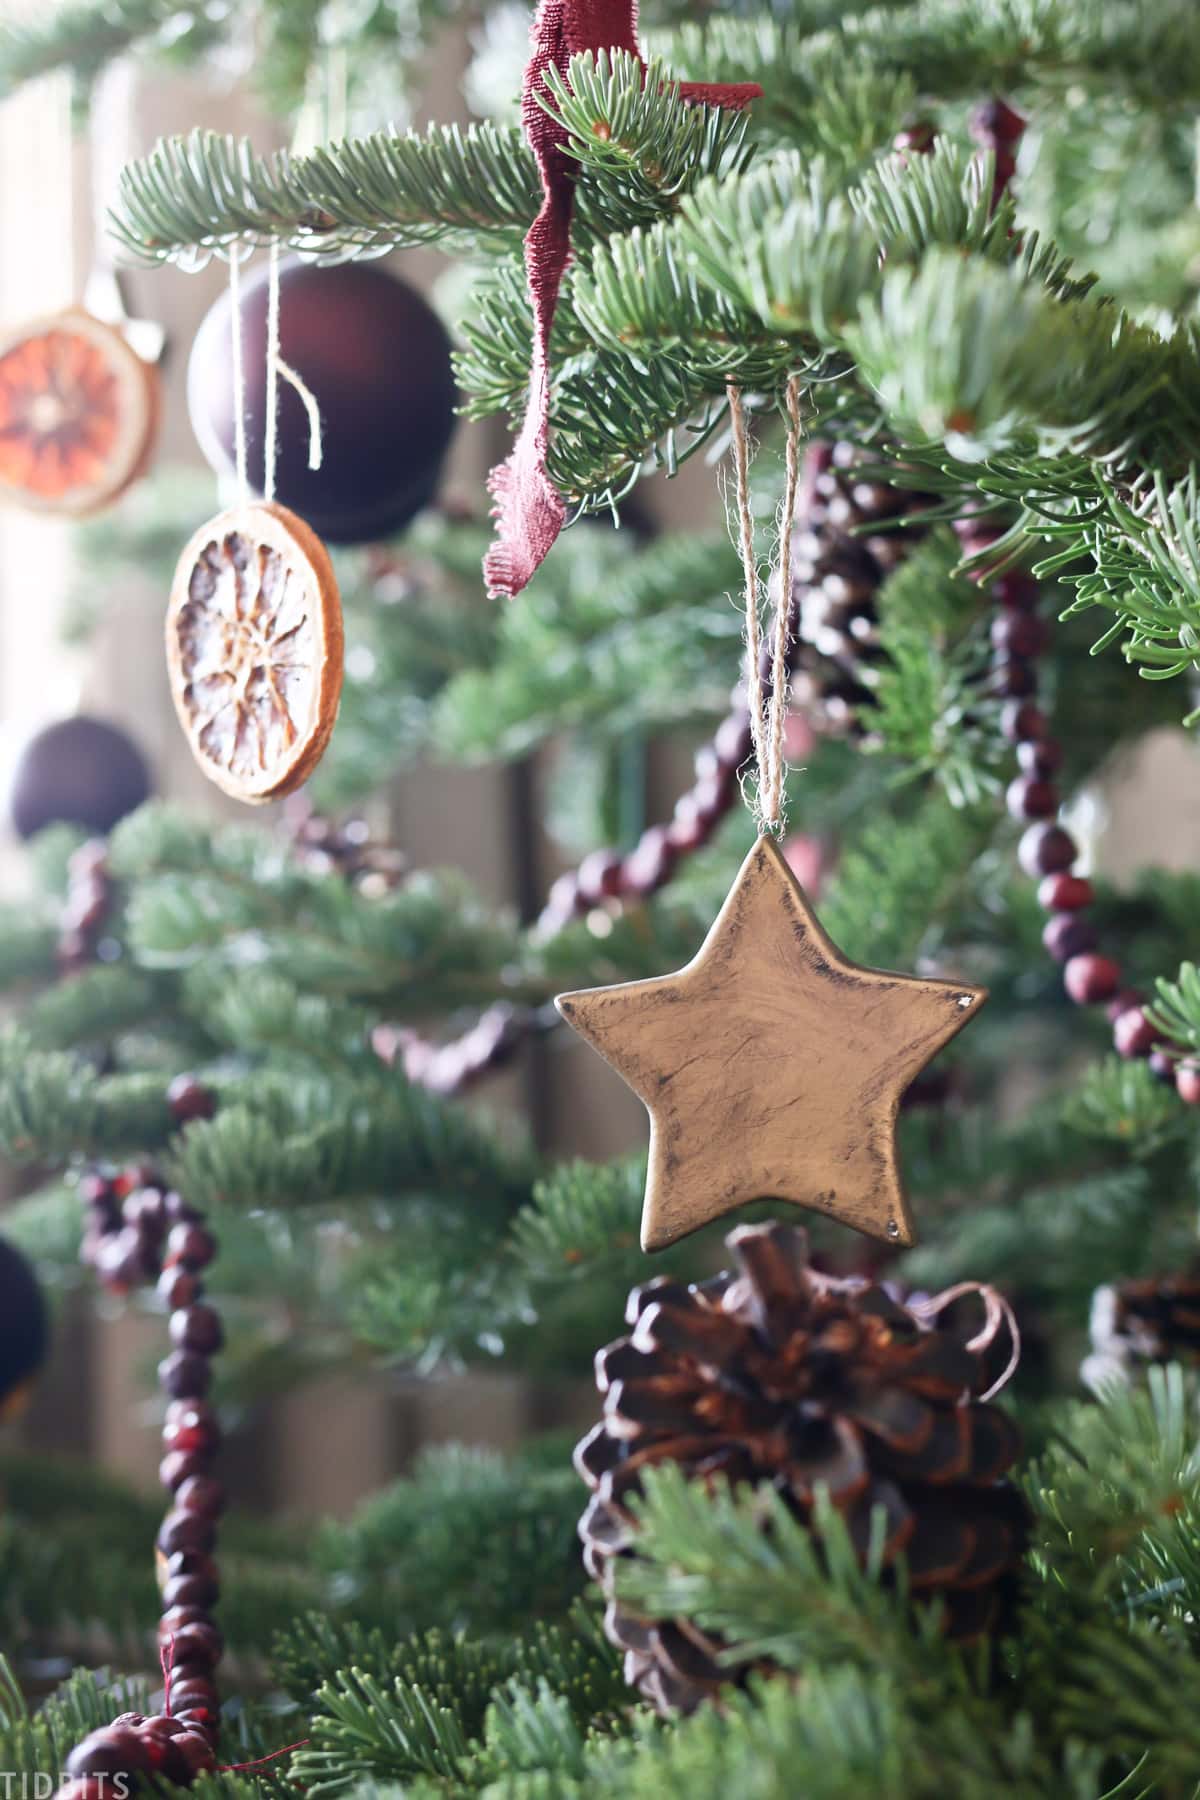 ceramic star hanging off Christmas tree branch next to round ornament and orange garland